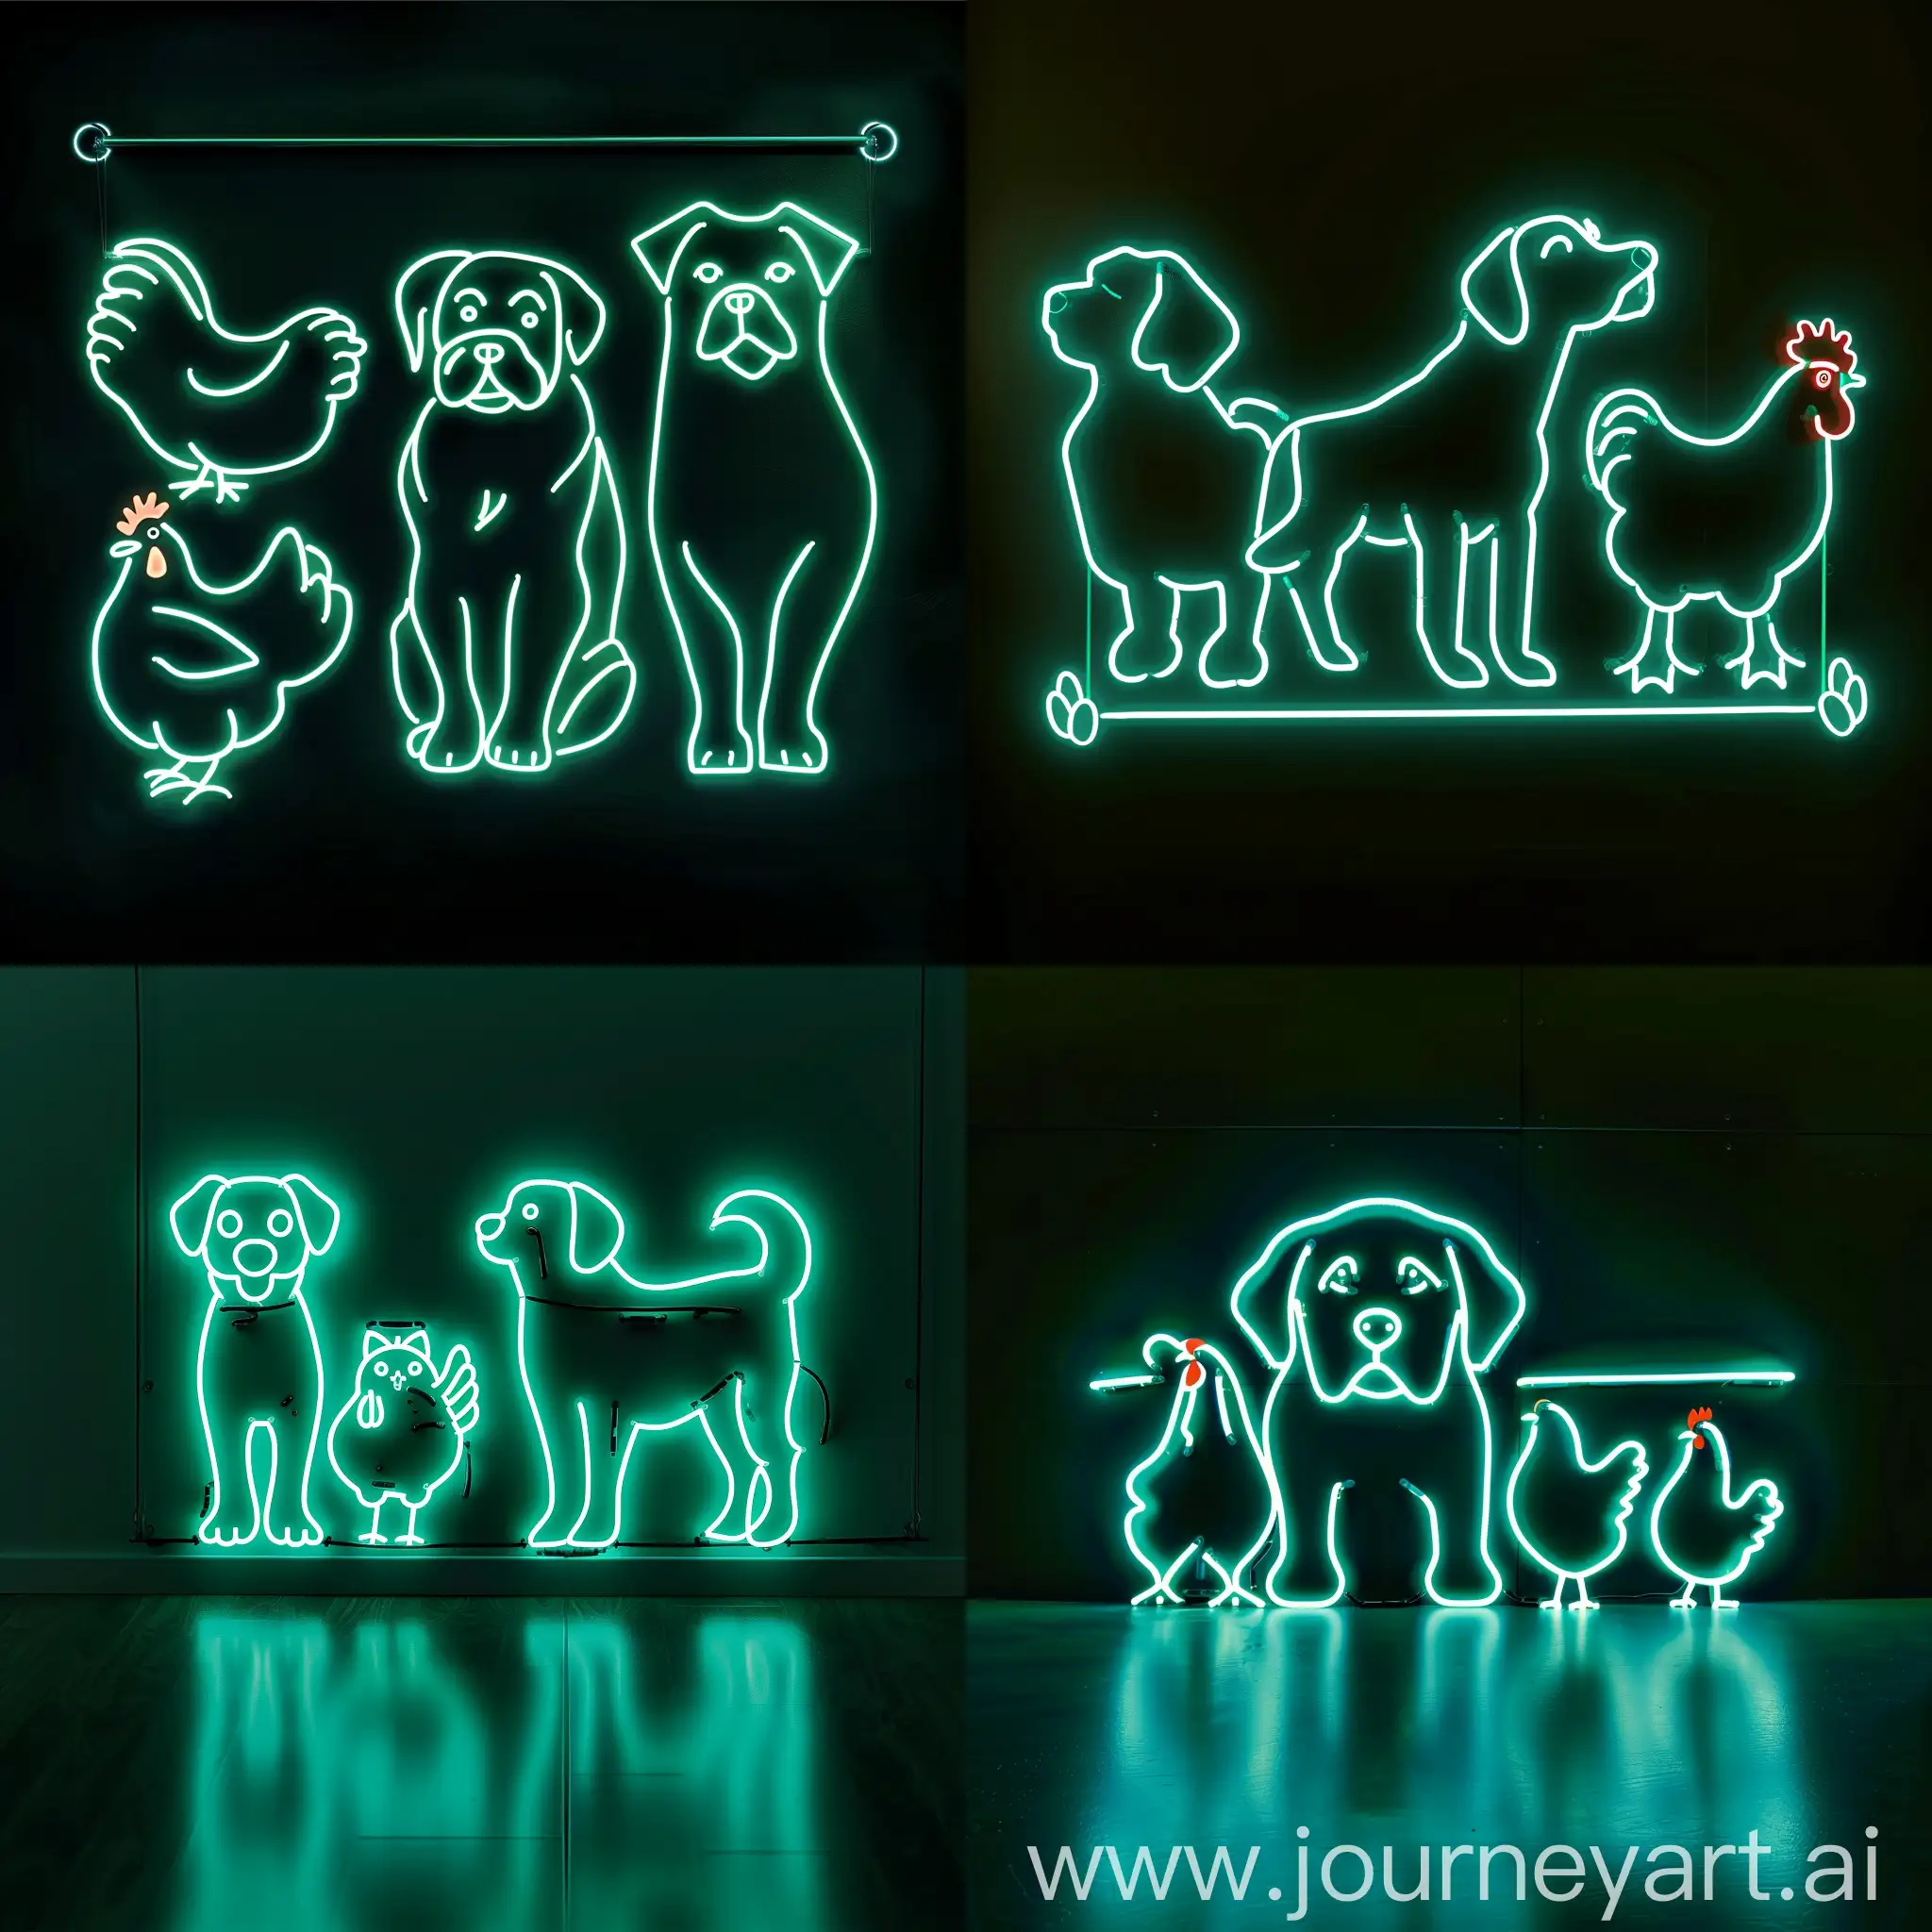 give me a pet clinic banner that created from neon lights with shape of dog , cat and chicken in the banner with 
Turquoise color